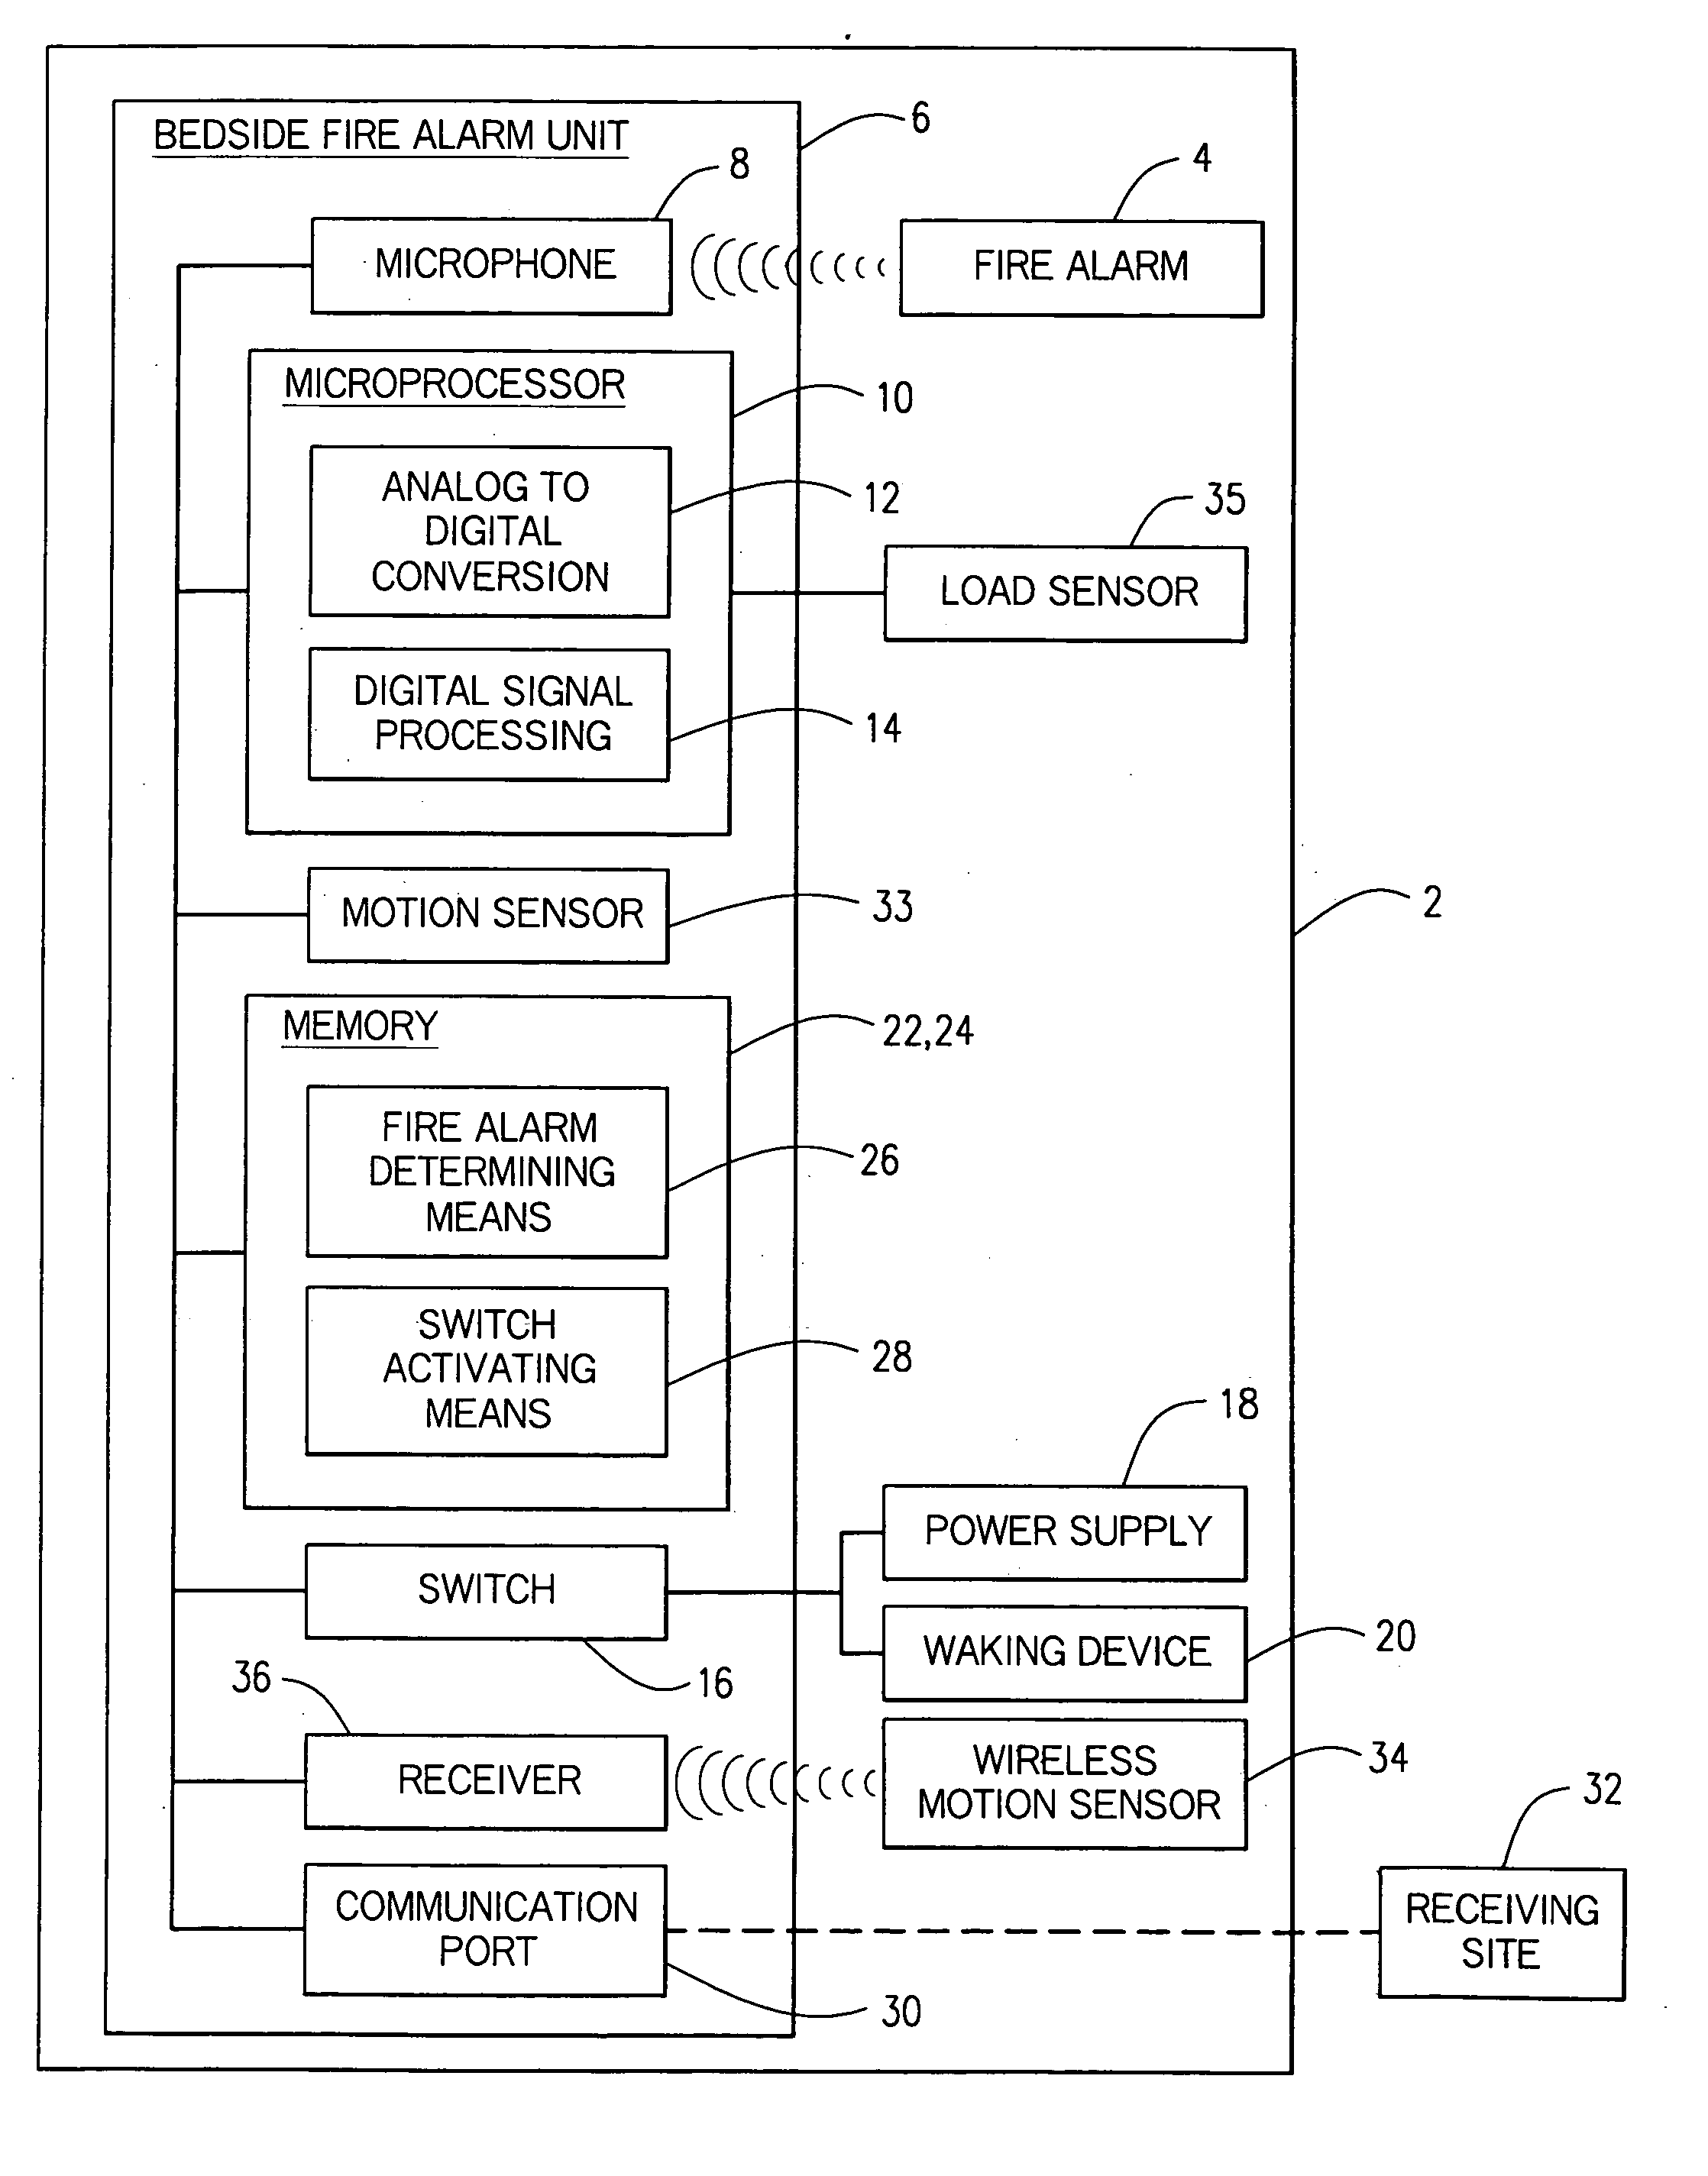 Enhanced fire, safety, security and health monitoring and alarm response method, system and device